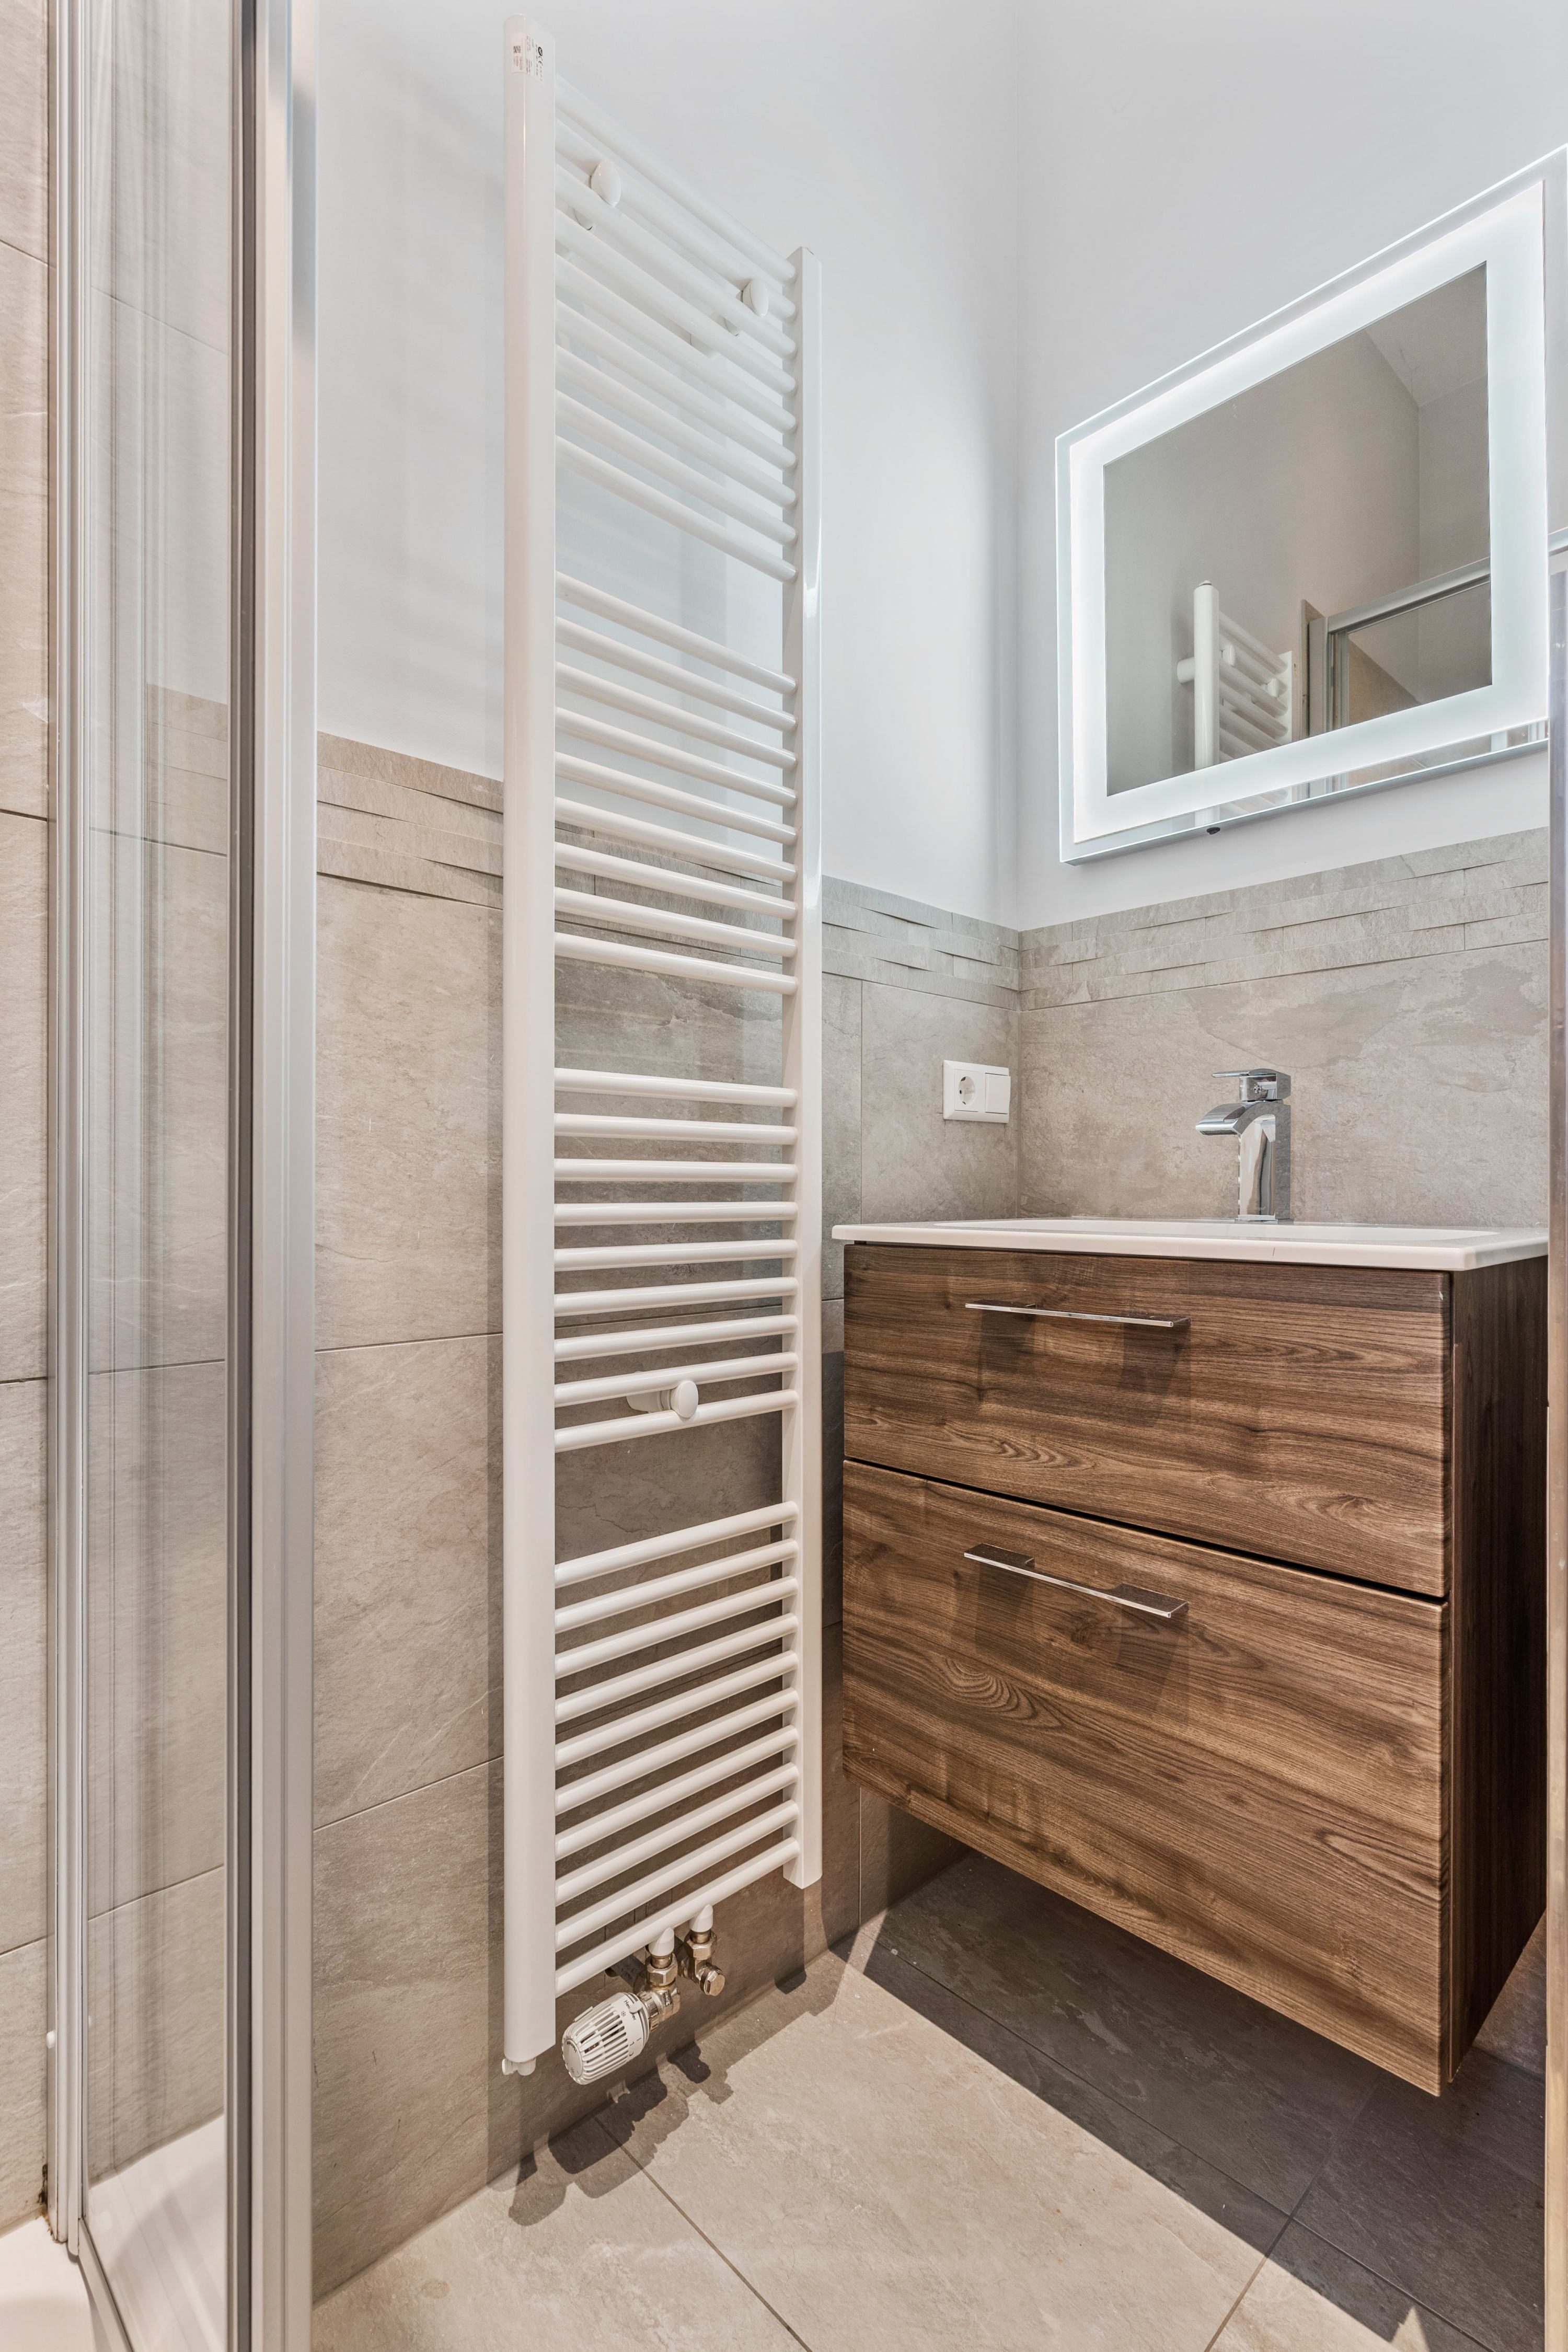 Refresh in a modern bathroom with chic fixtures and a touch of natural wood. Direct bookings: www.arcaproperties.lu